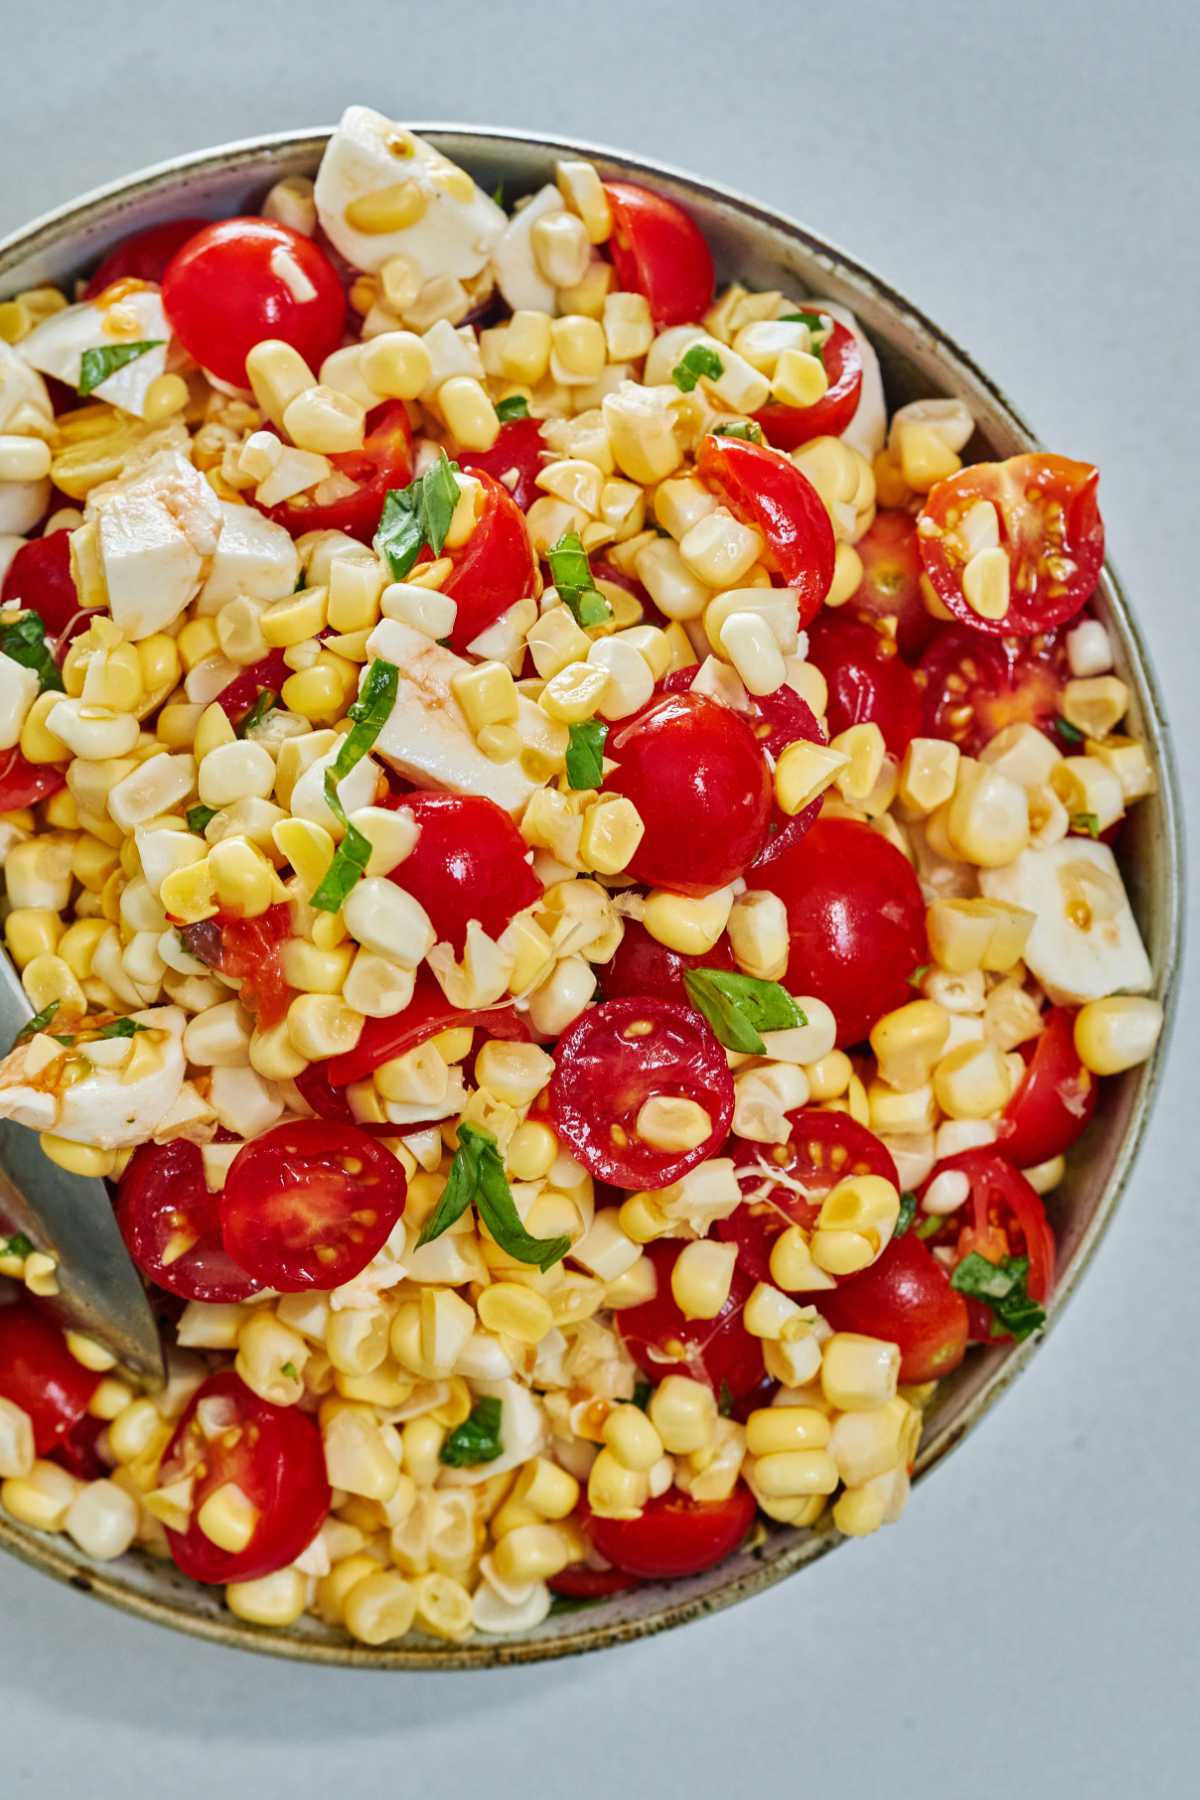 Corn and tomato salad in a large bowl.